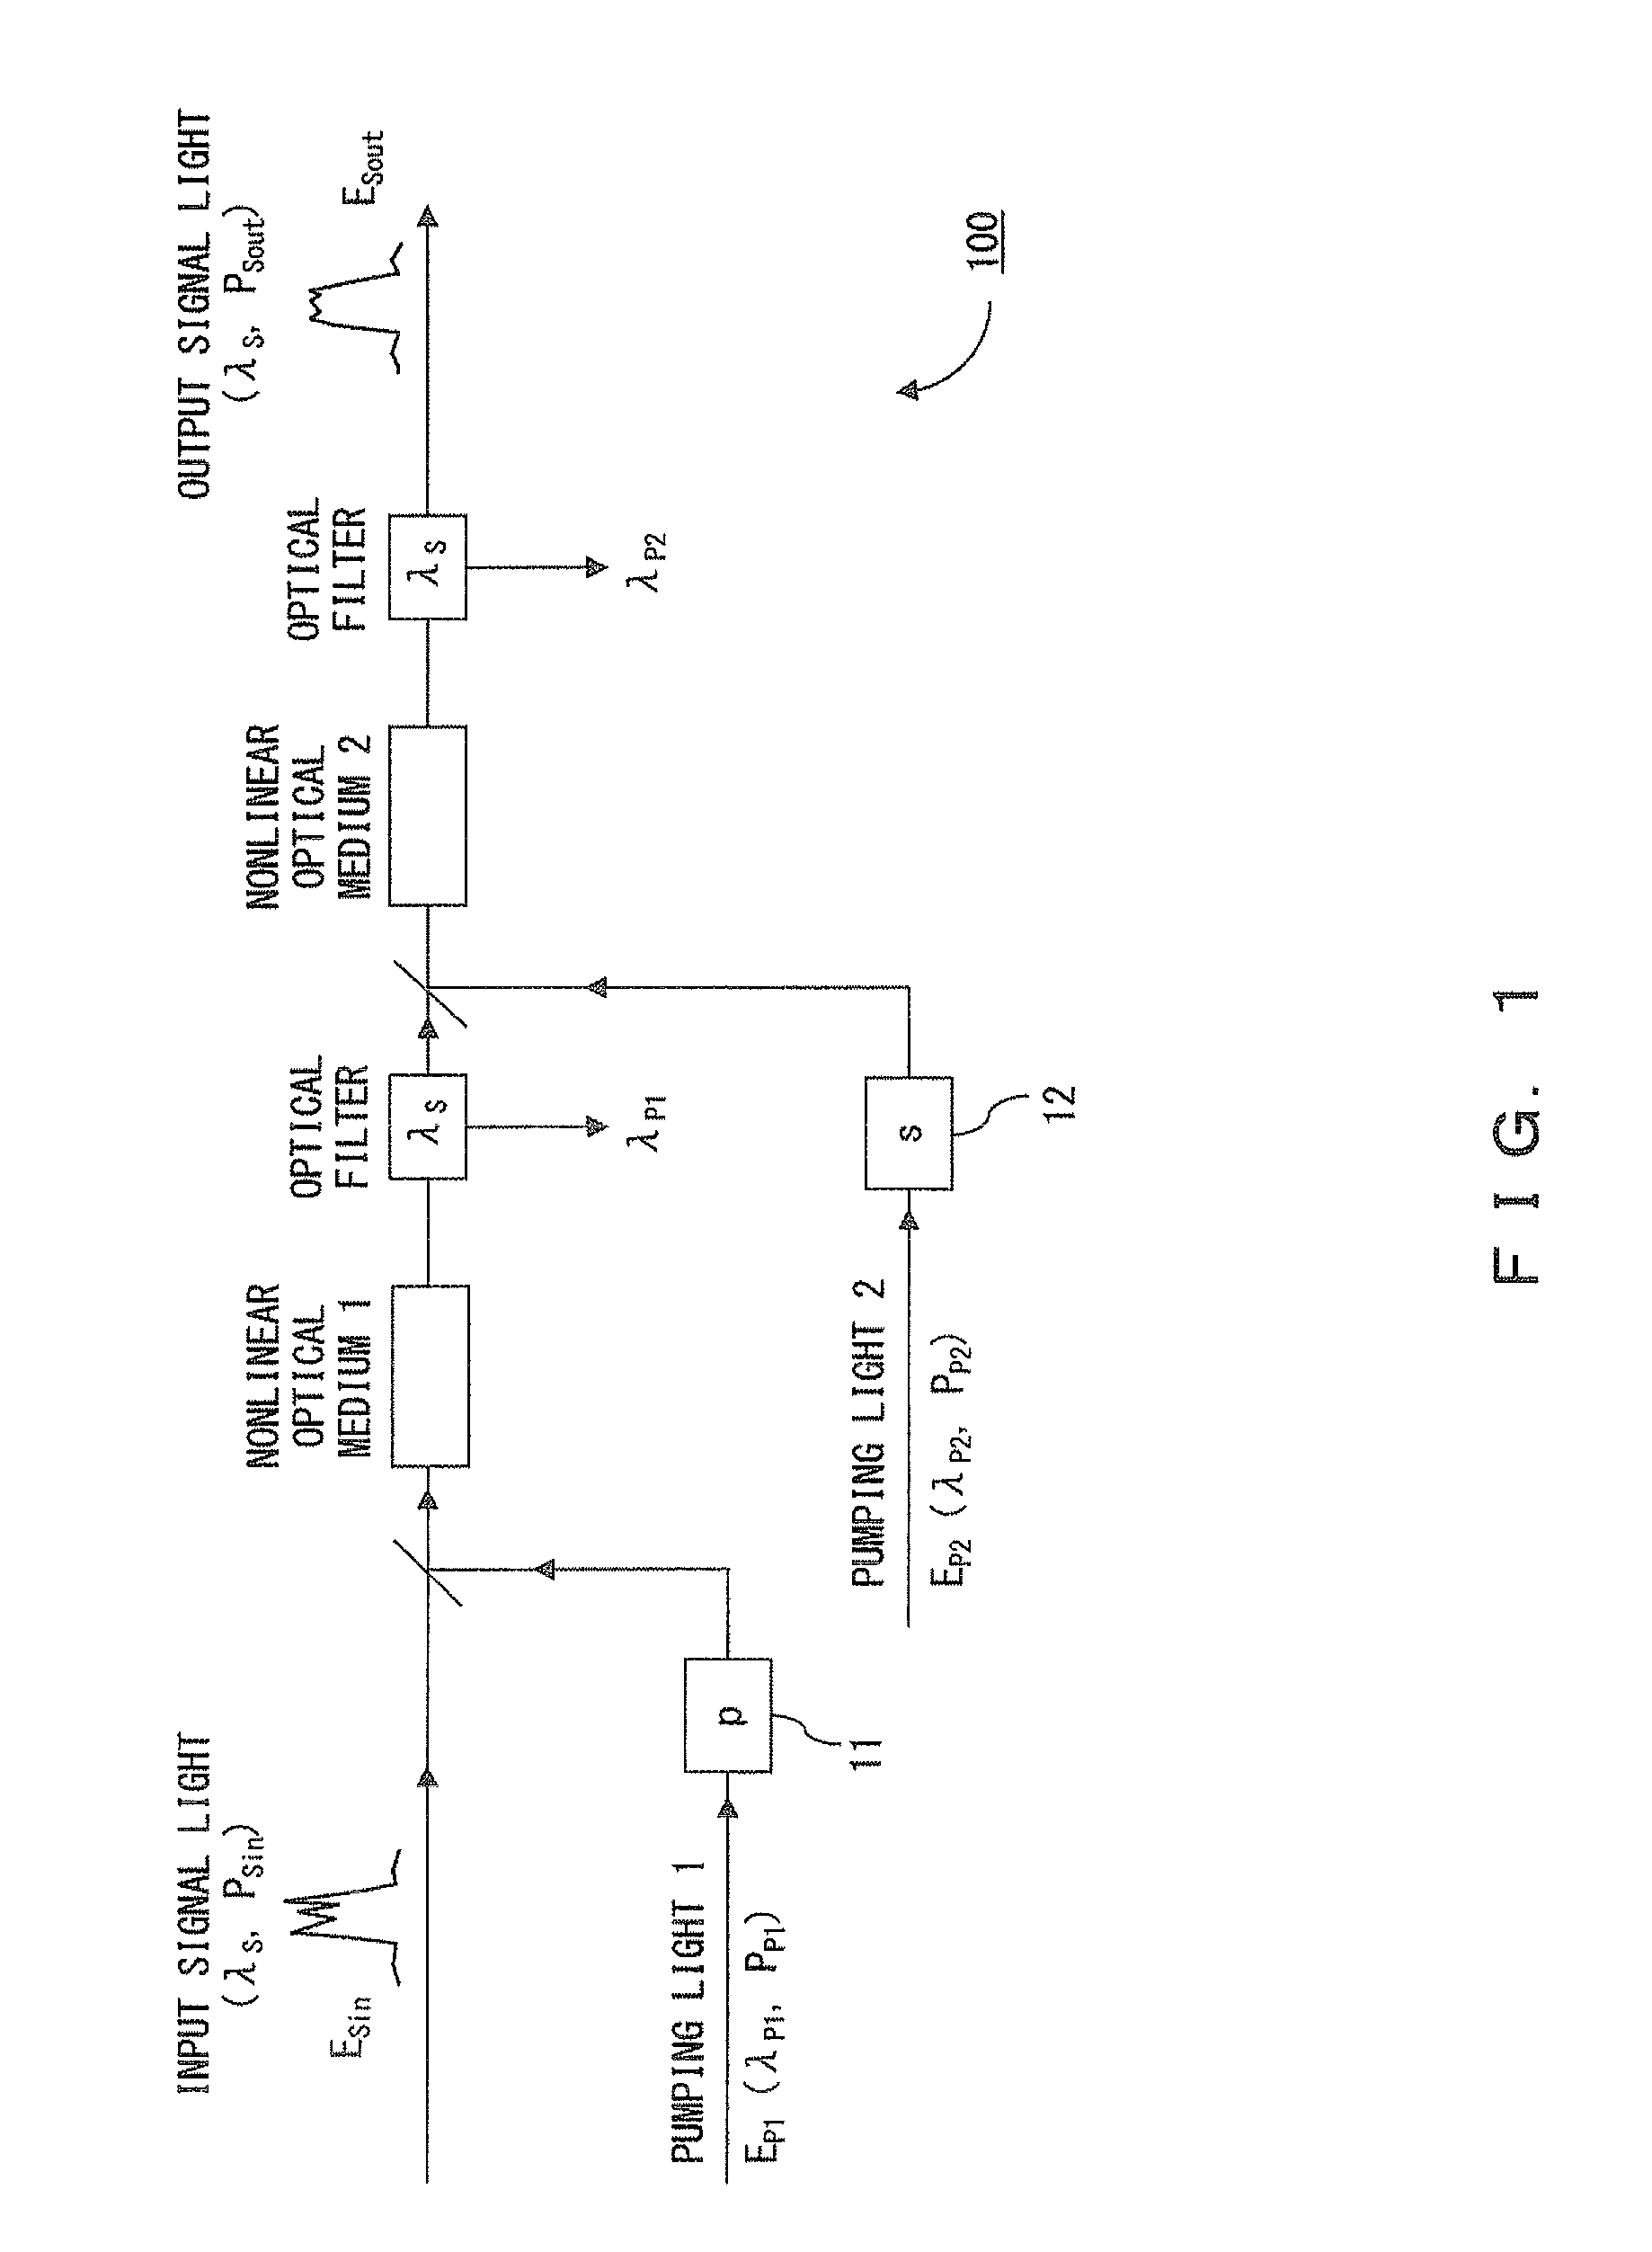 Optical signal processing device